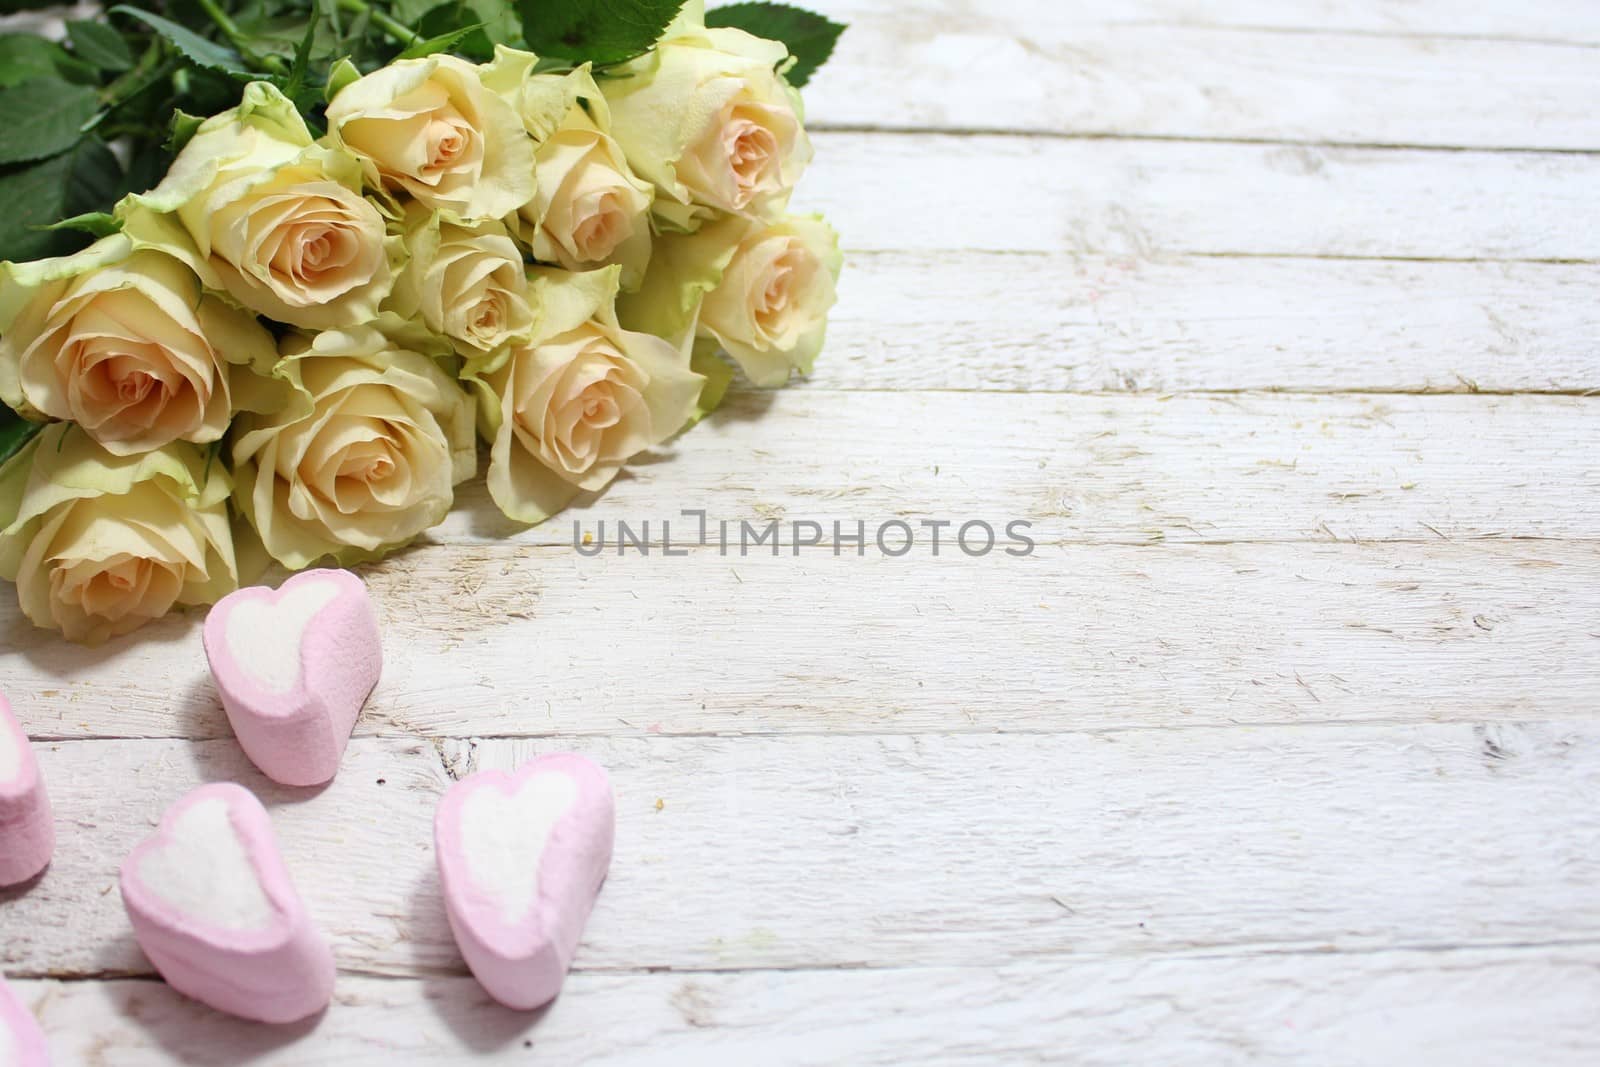 The picture shows white roses and marshmallow.